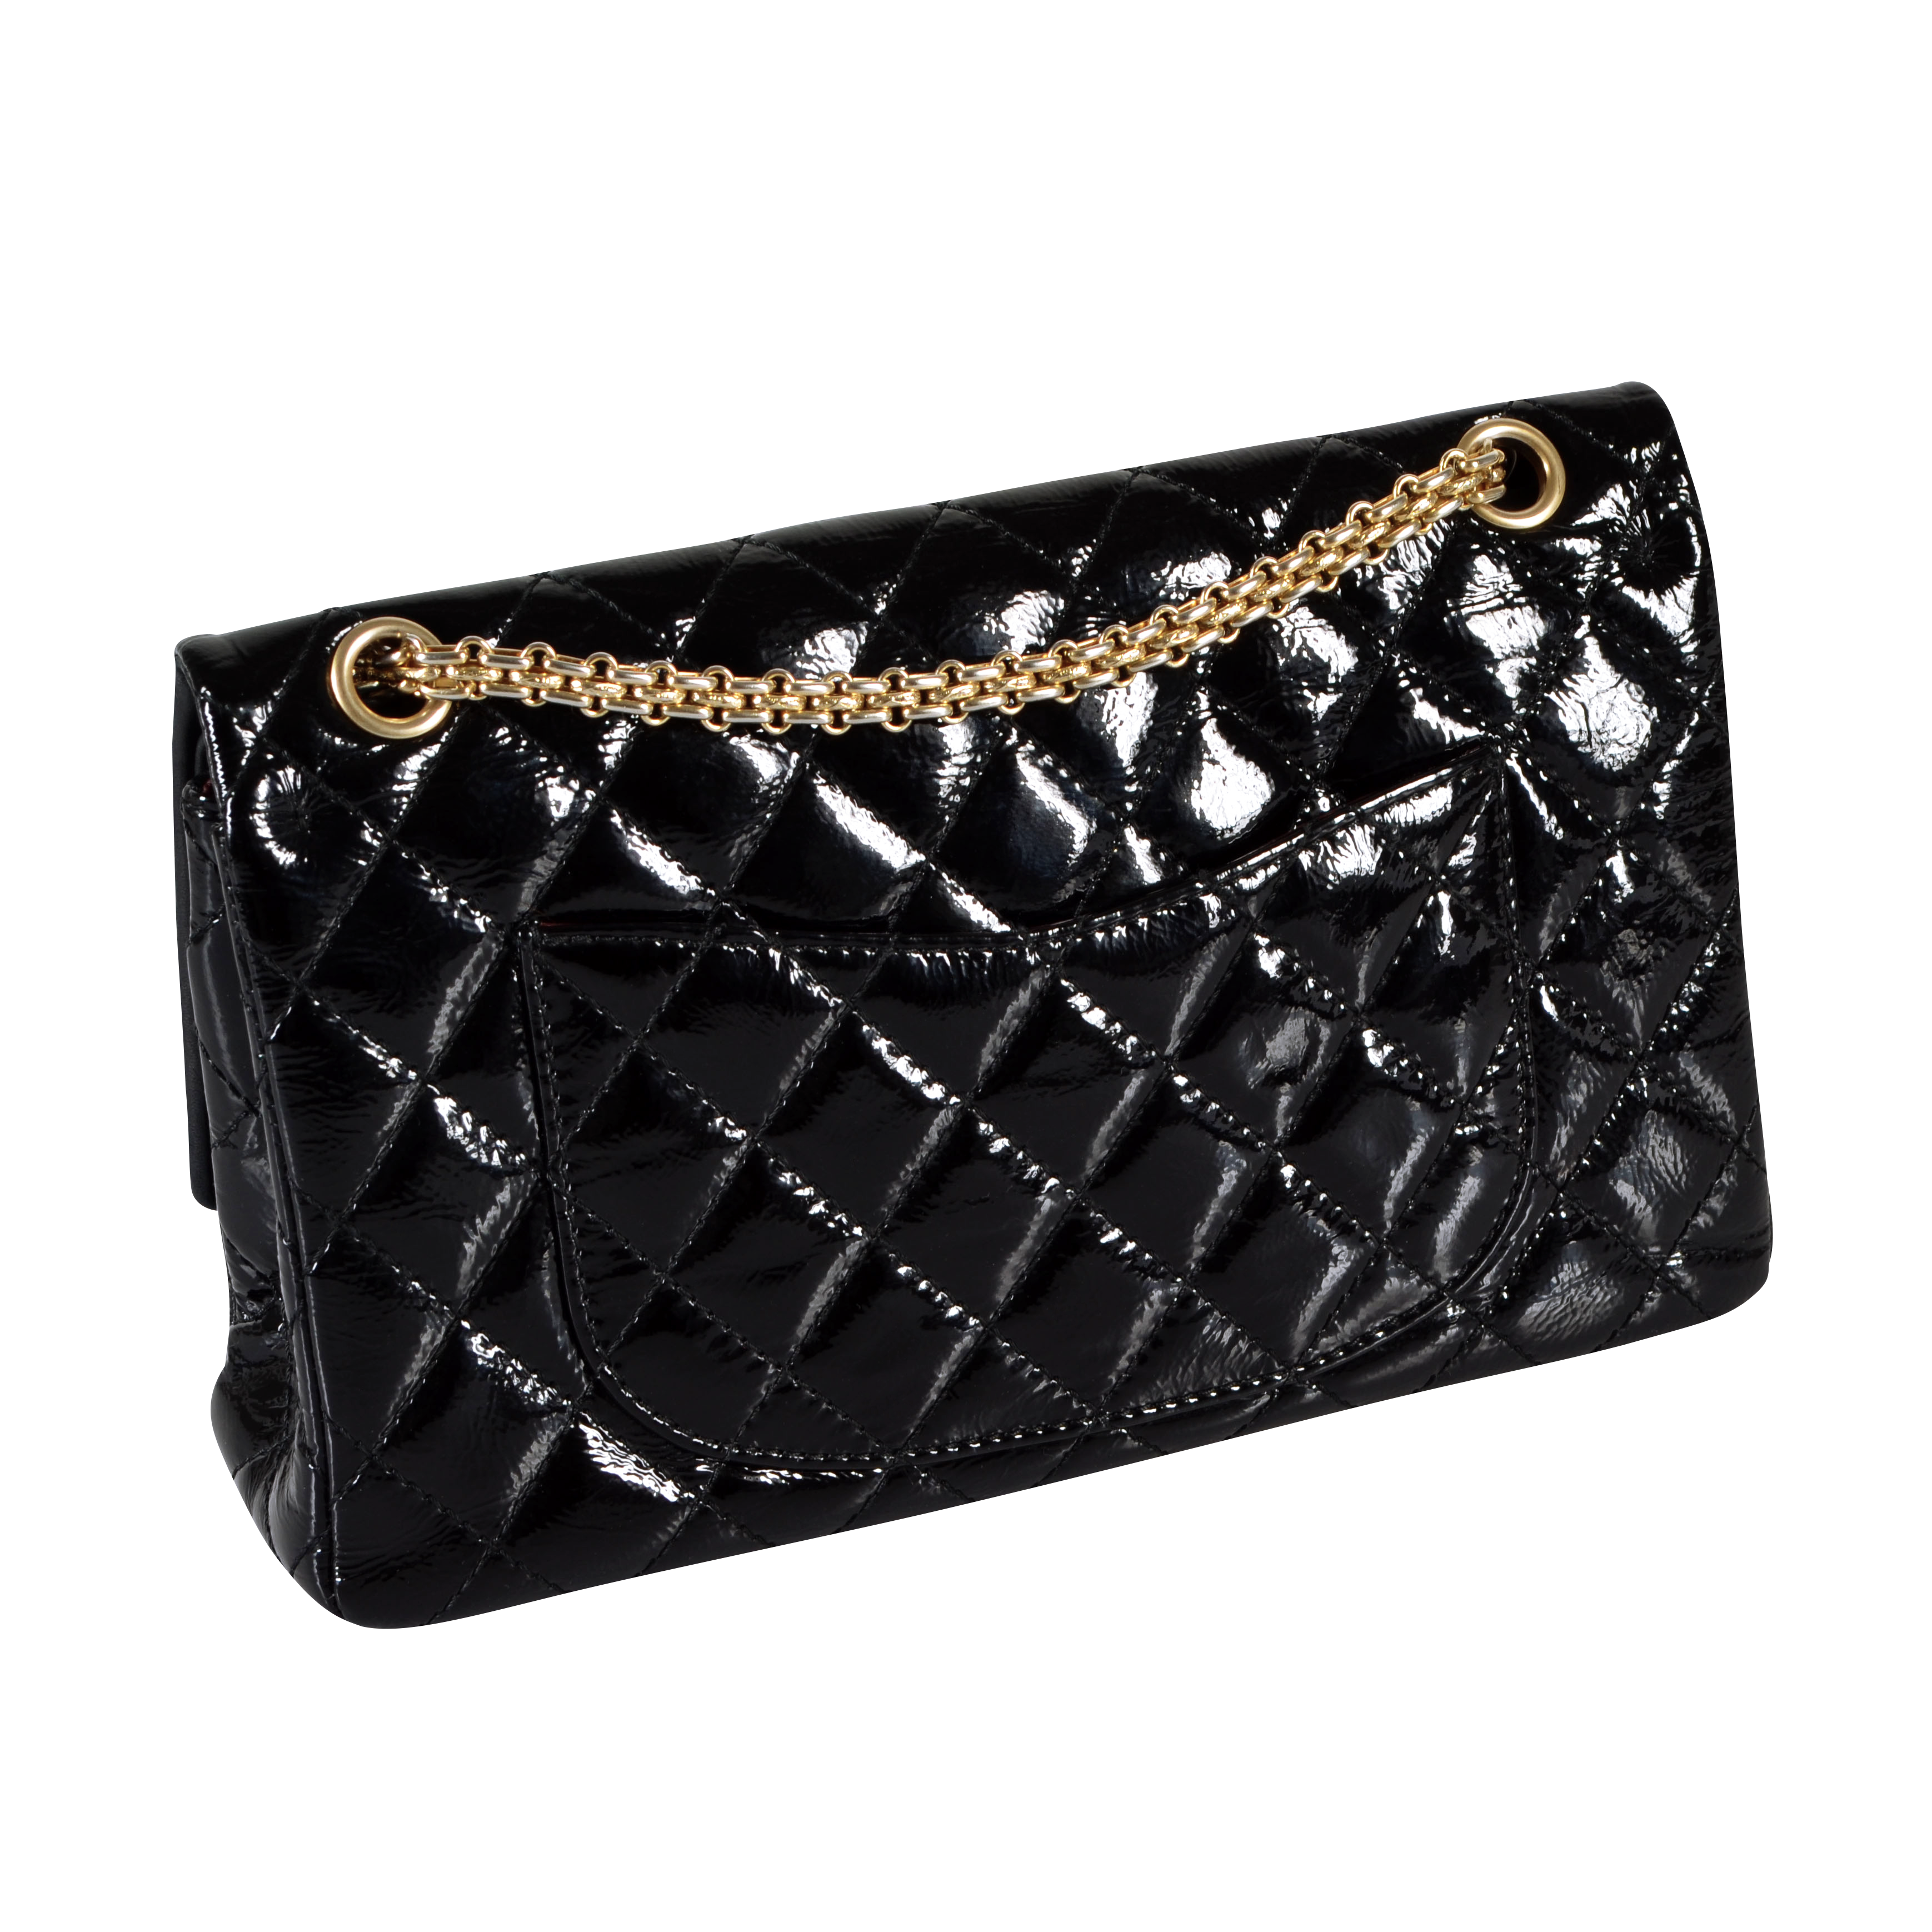 CHANEL 2.55 Reissue Double Flap Bag Second Hand - MyLovelyBoutique